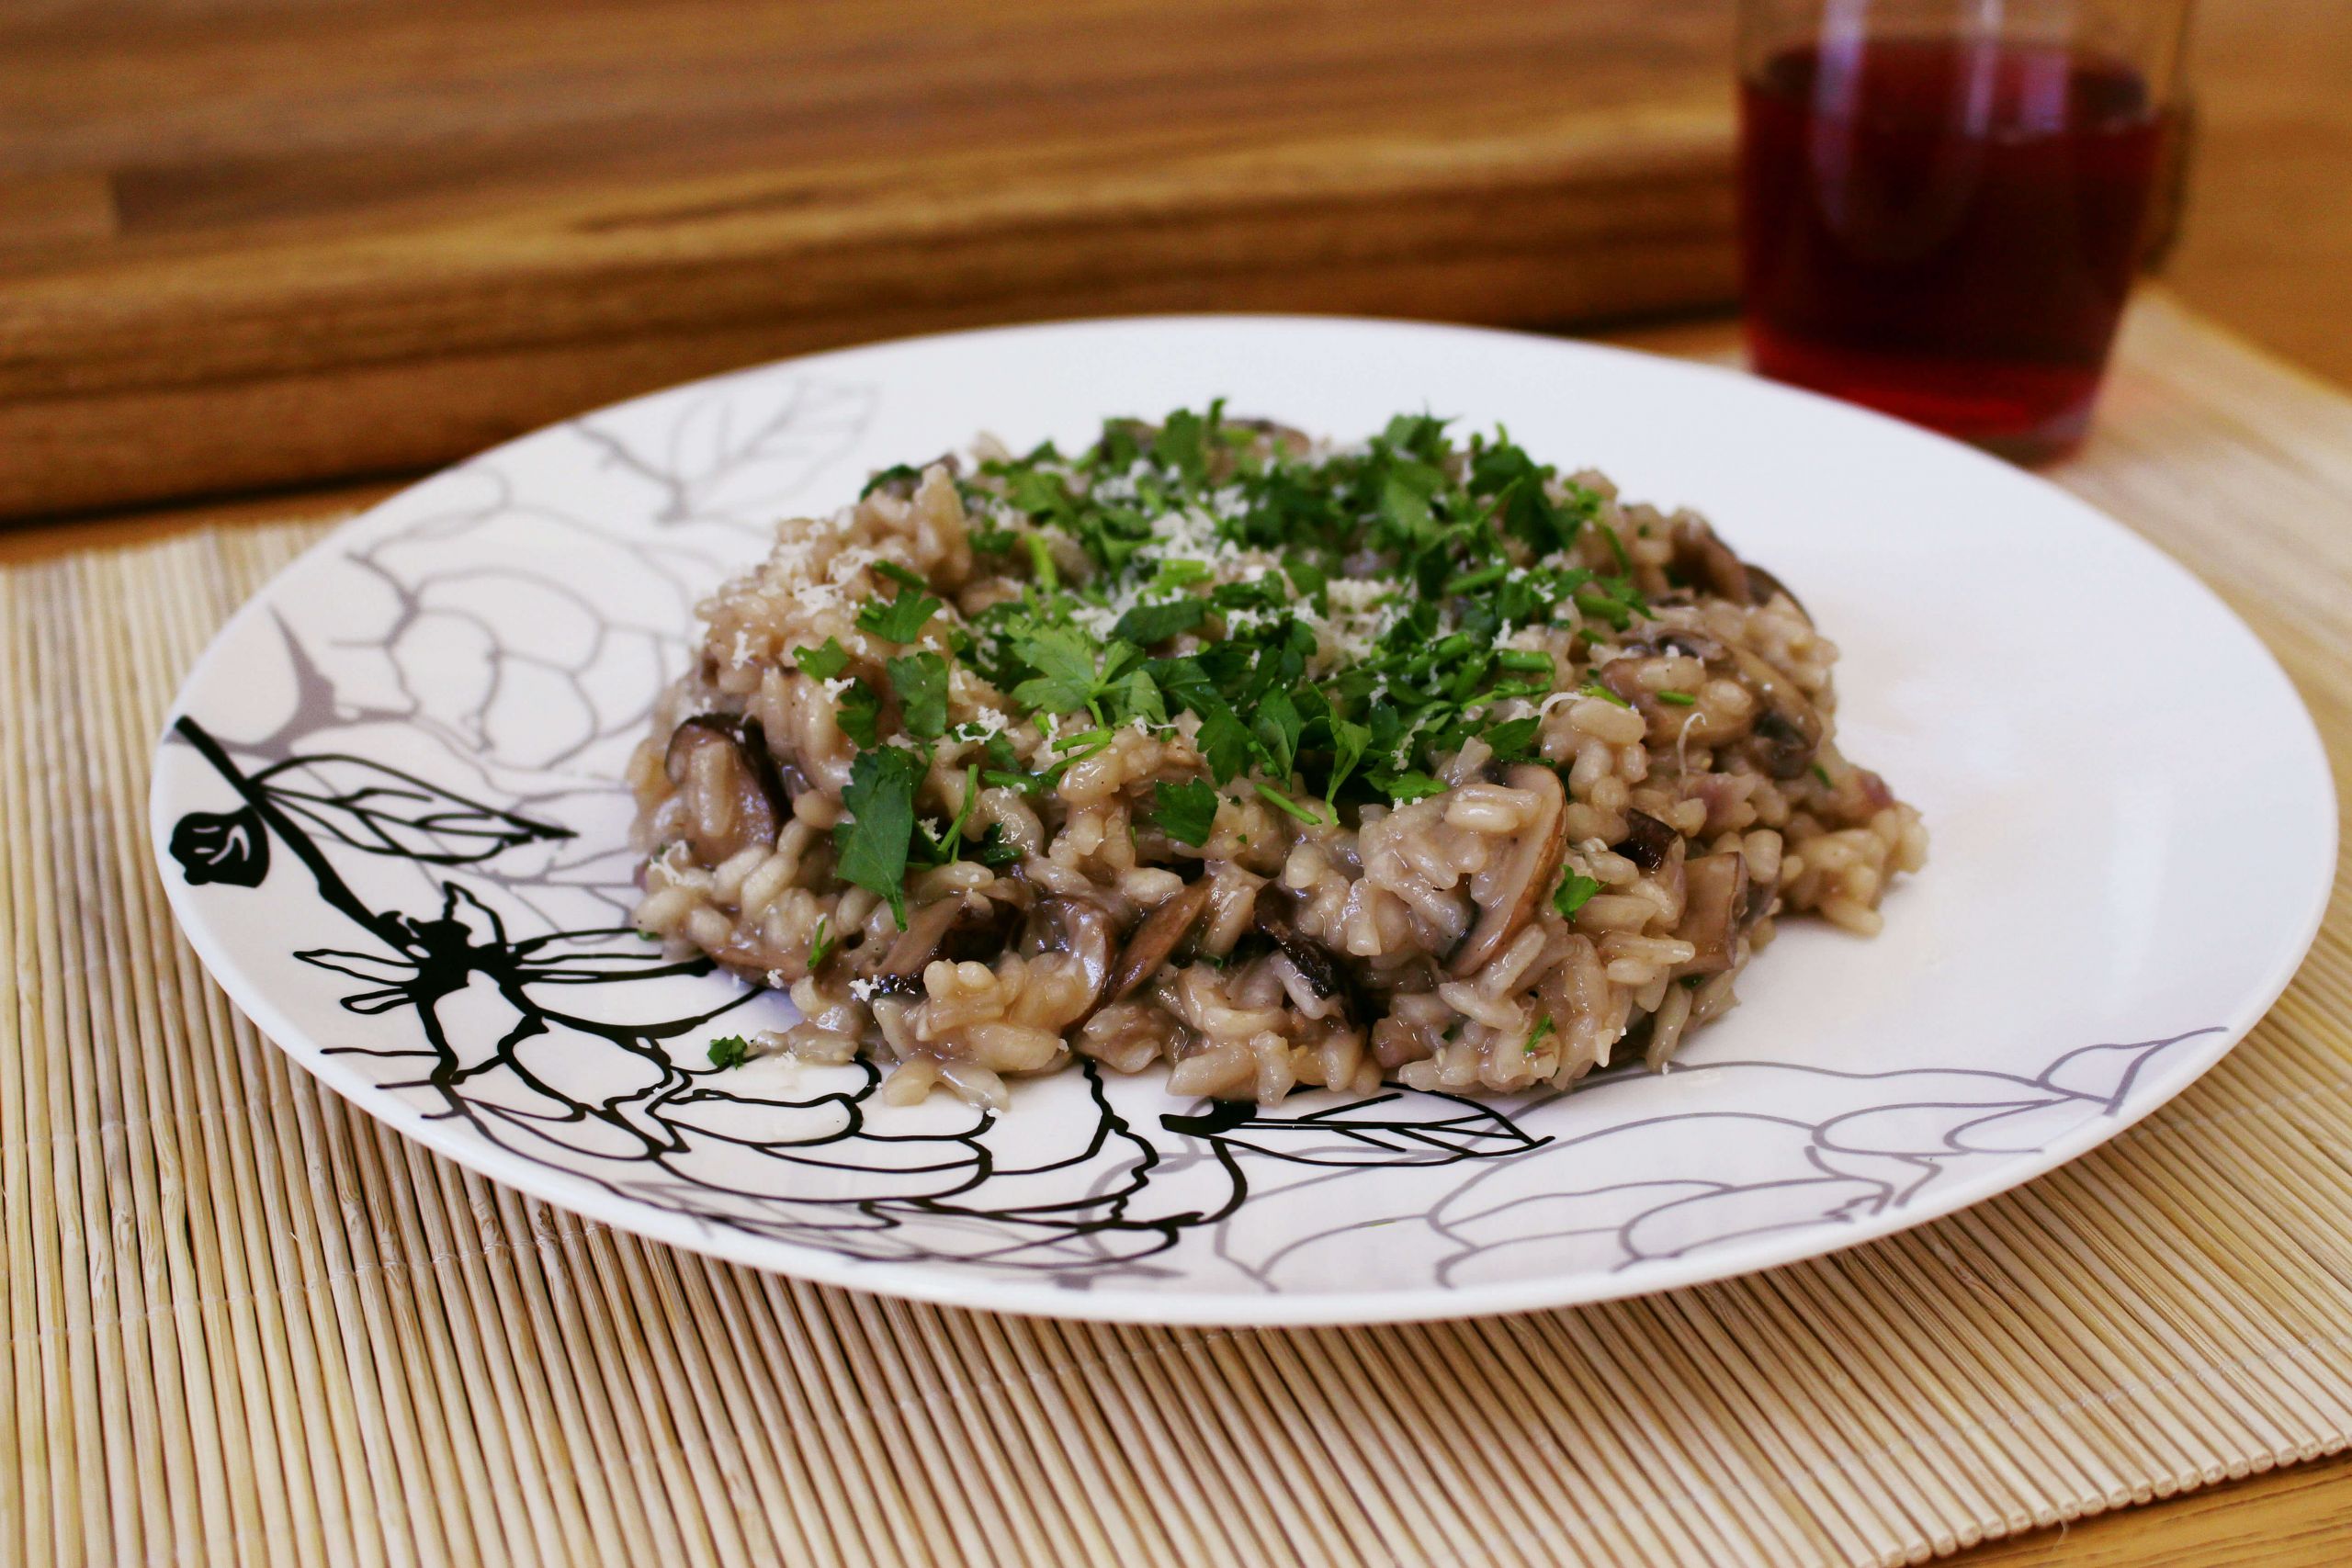 Gourmet Mushroom Risotto Luxury Gourmet Mushroom Risotto Very Tasty and Quick to Make